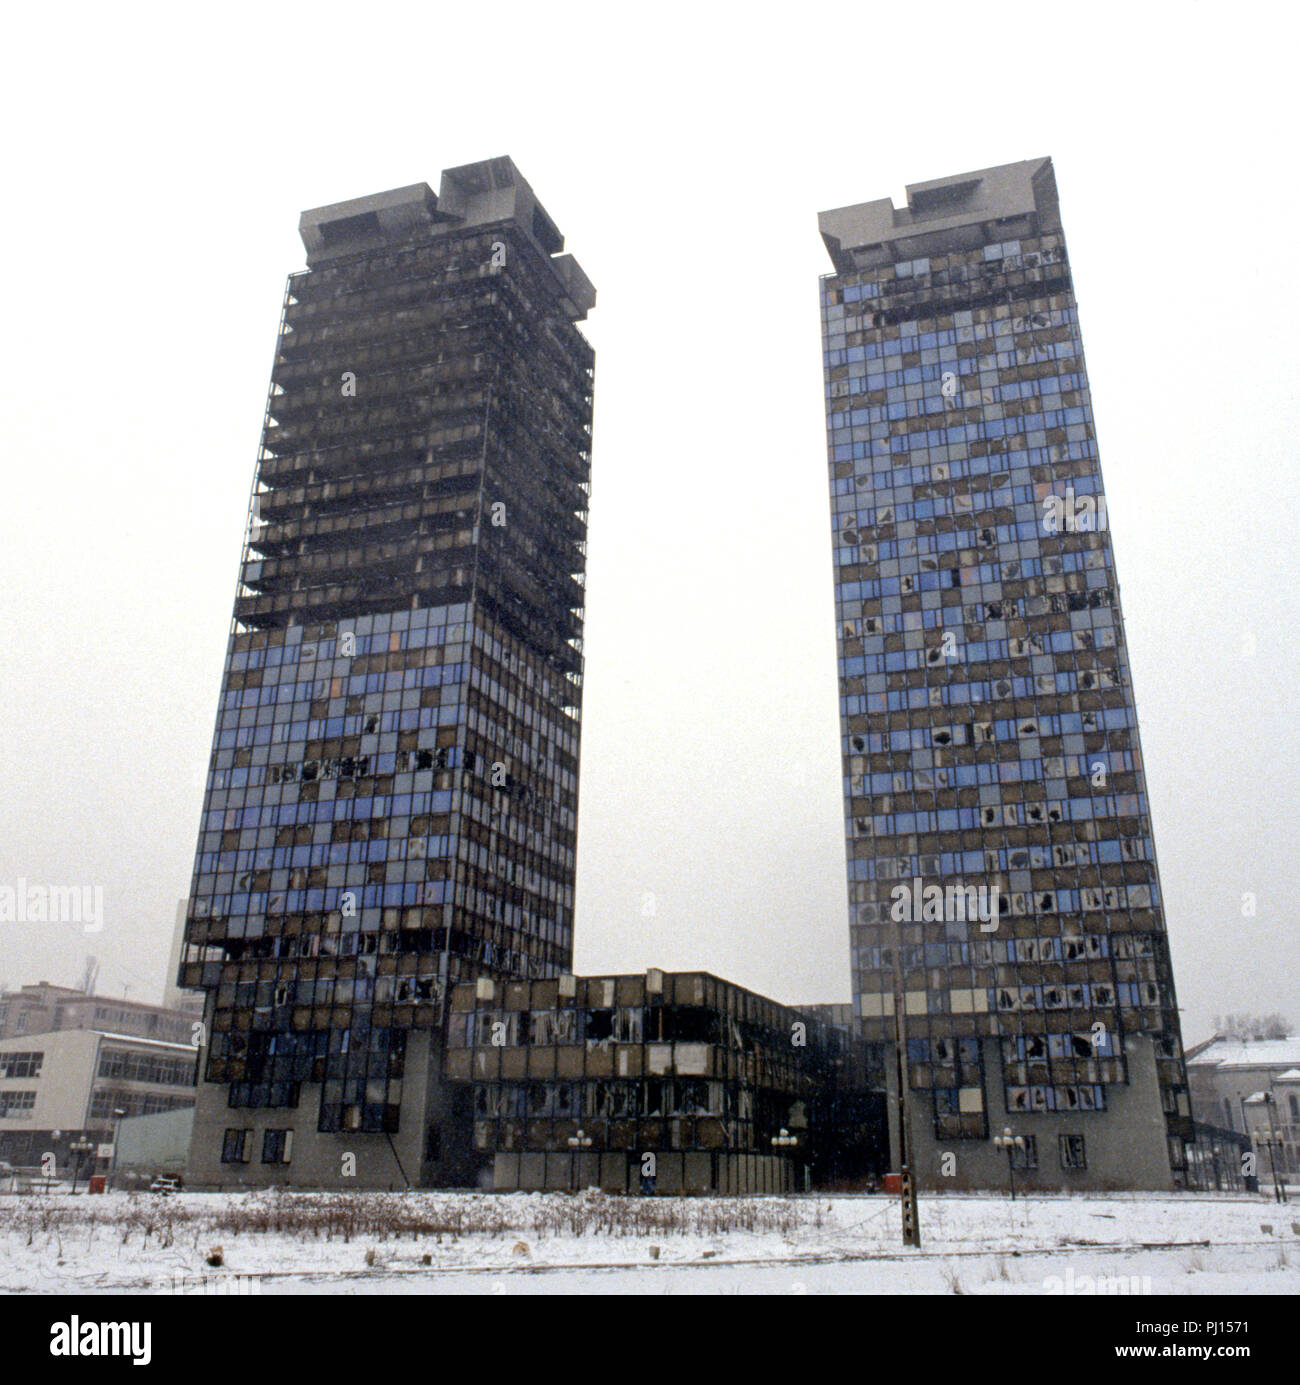 5th March 1993 During the Siege of Sarajevo: the war-damaged twin Unis Towers. They were built in the 1980s and were nicknamed 'Momo' and 'Uzeir', a Serb and a Bosniak, after characters in a radio comedy. Stock Photo